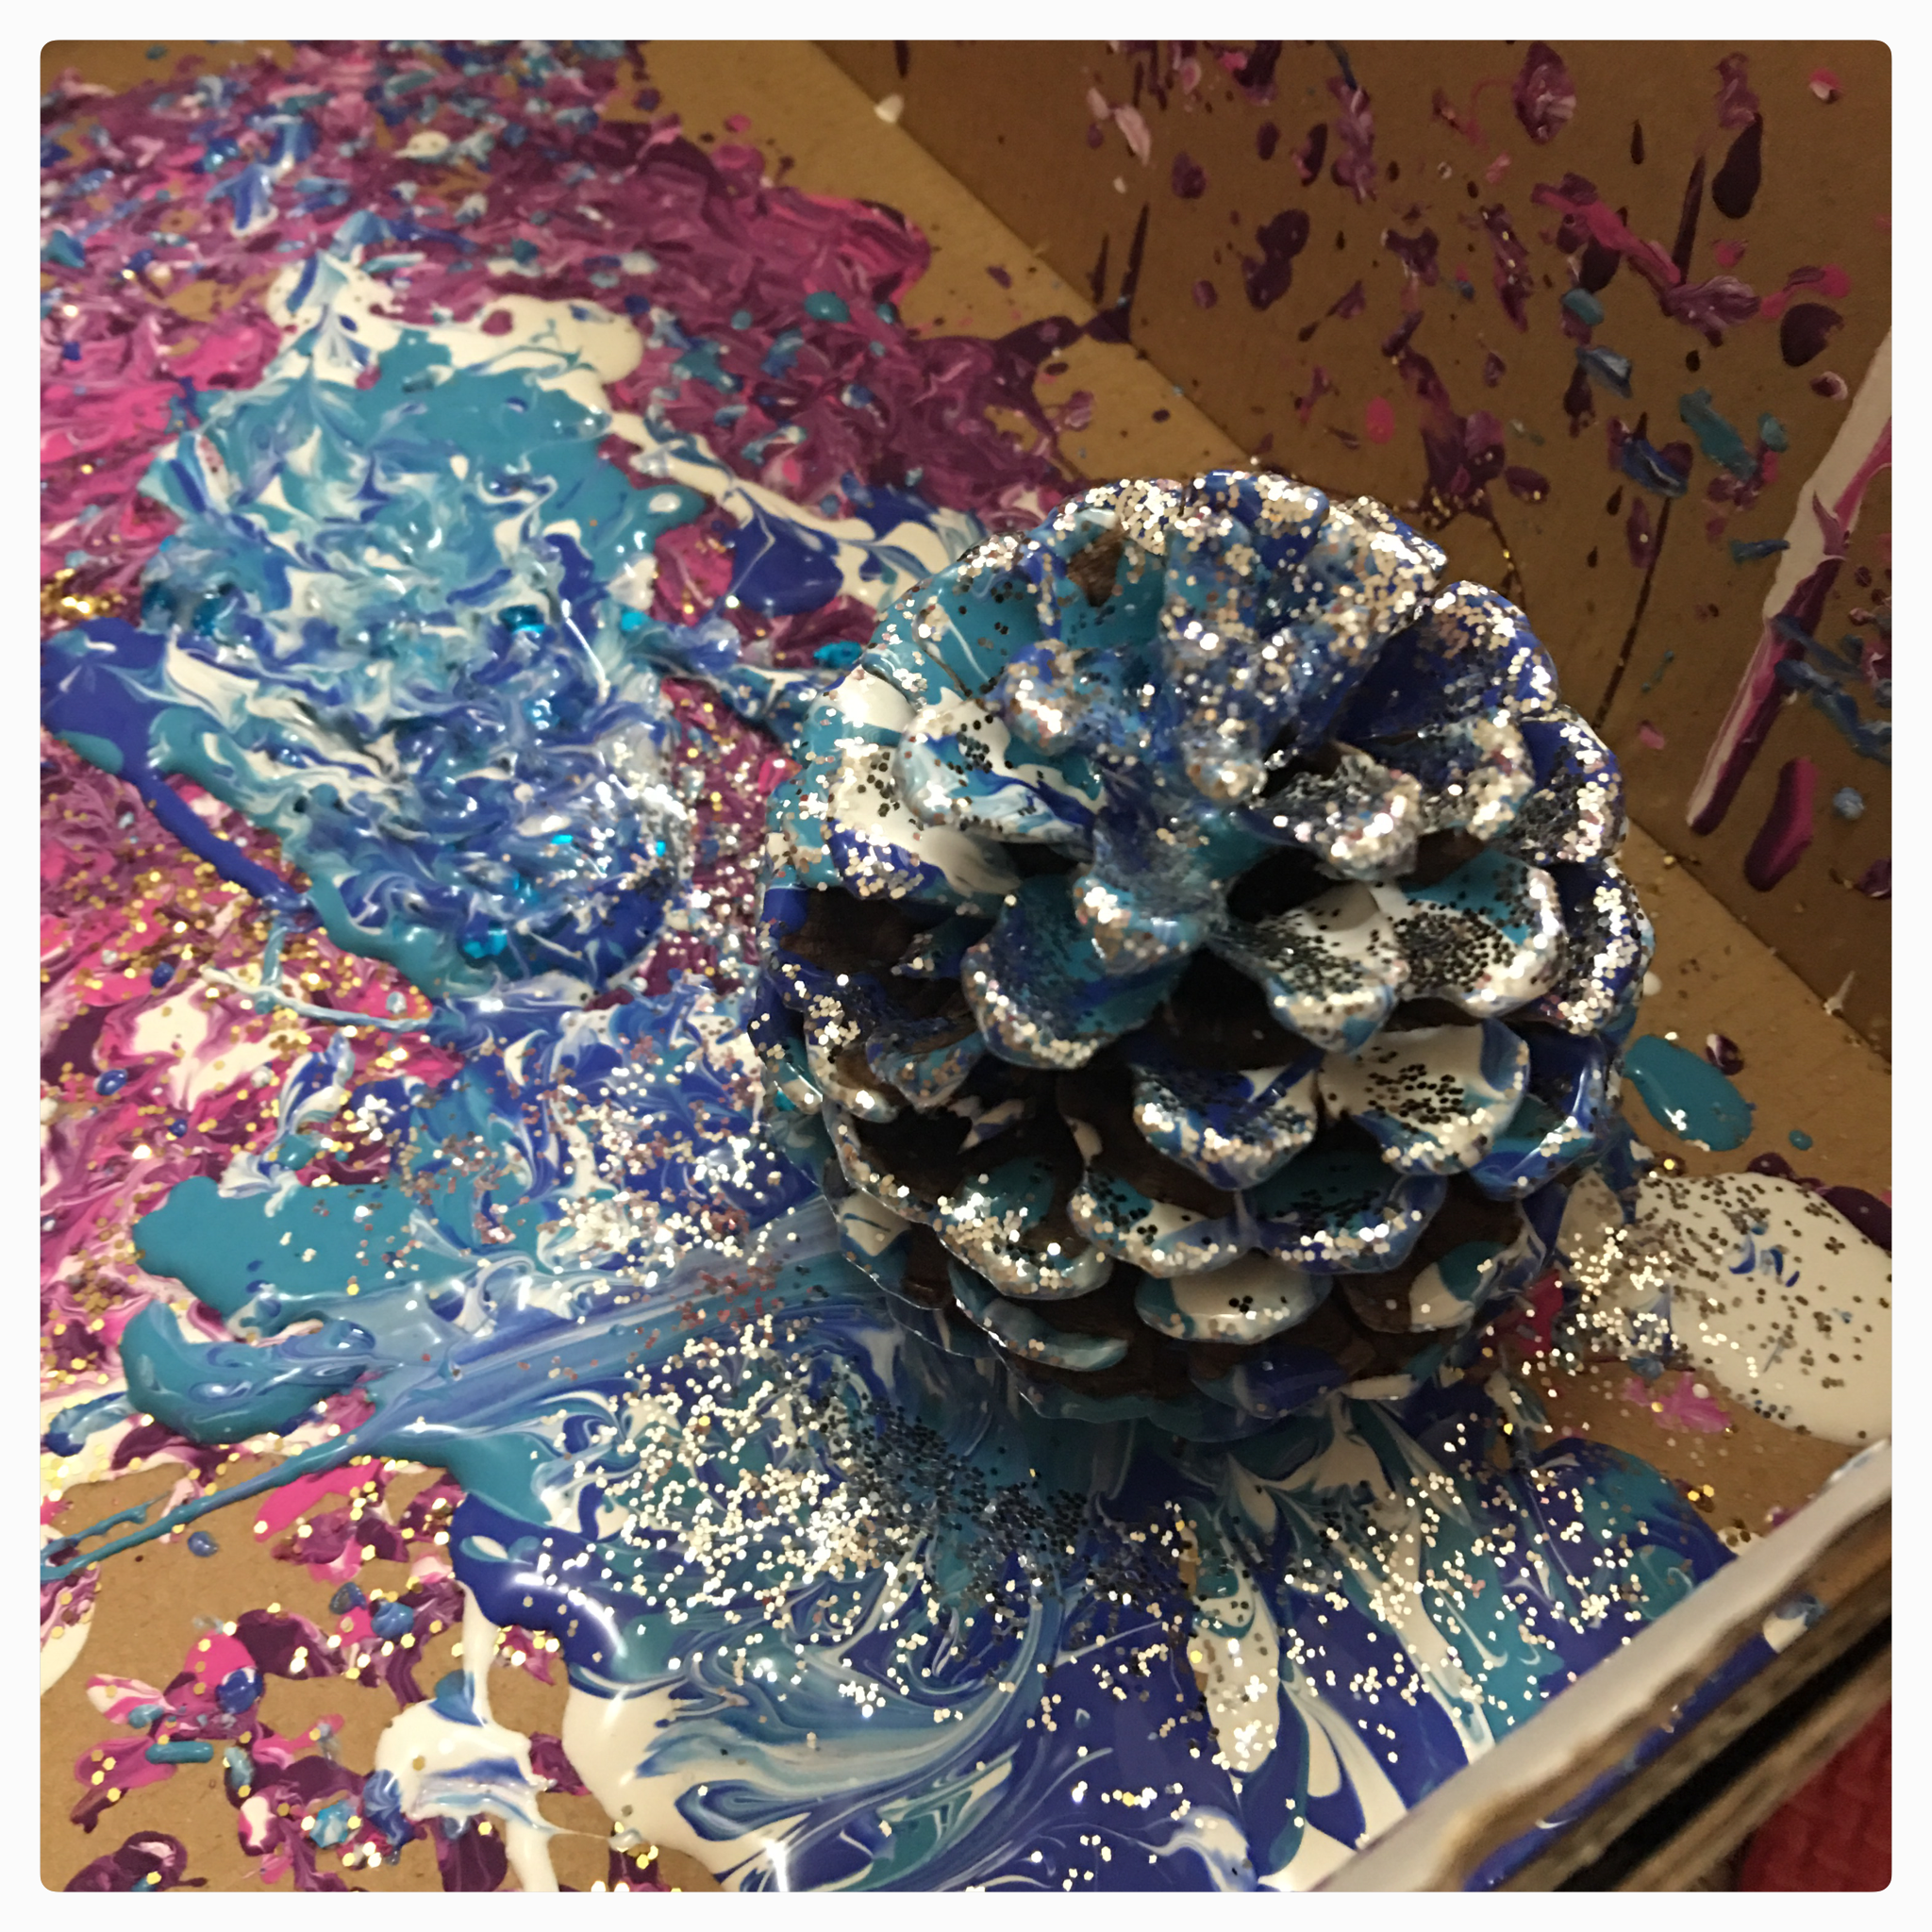 Pine Cone Process art - just use an old shoe box, add some paint, a pine cone from your nature walk, and maybe some glitter. Close the lid, and Shake!